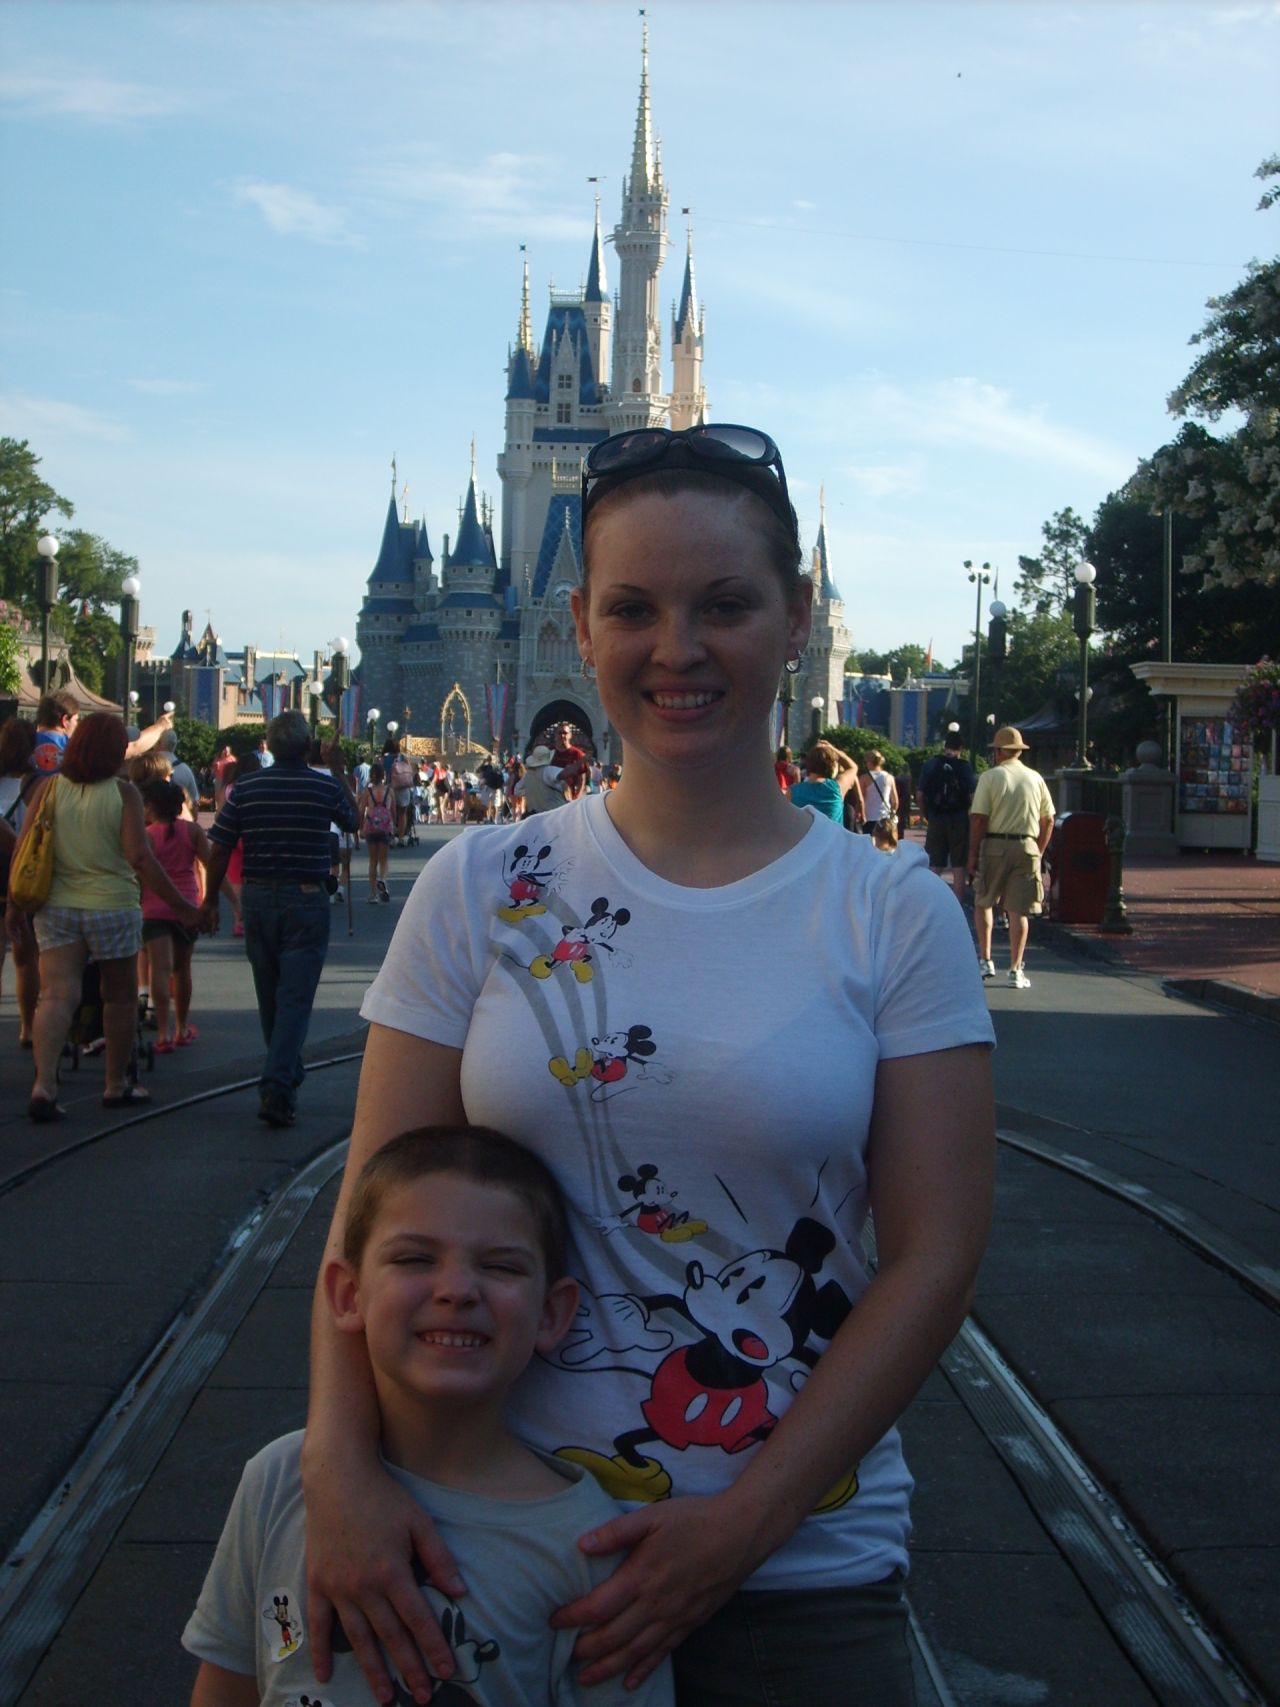 After her divorce, the author saved all year to take her son to Disney World. "I was very aware that as a single mom, I would have to struggle to support us, and this was my way of proving to myself that I would still be able to make wonderful memories," she said.